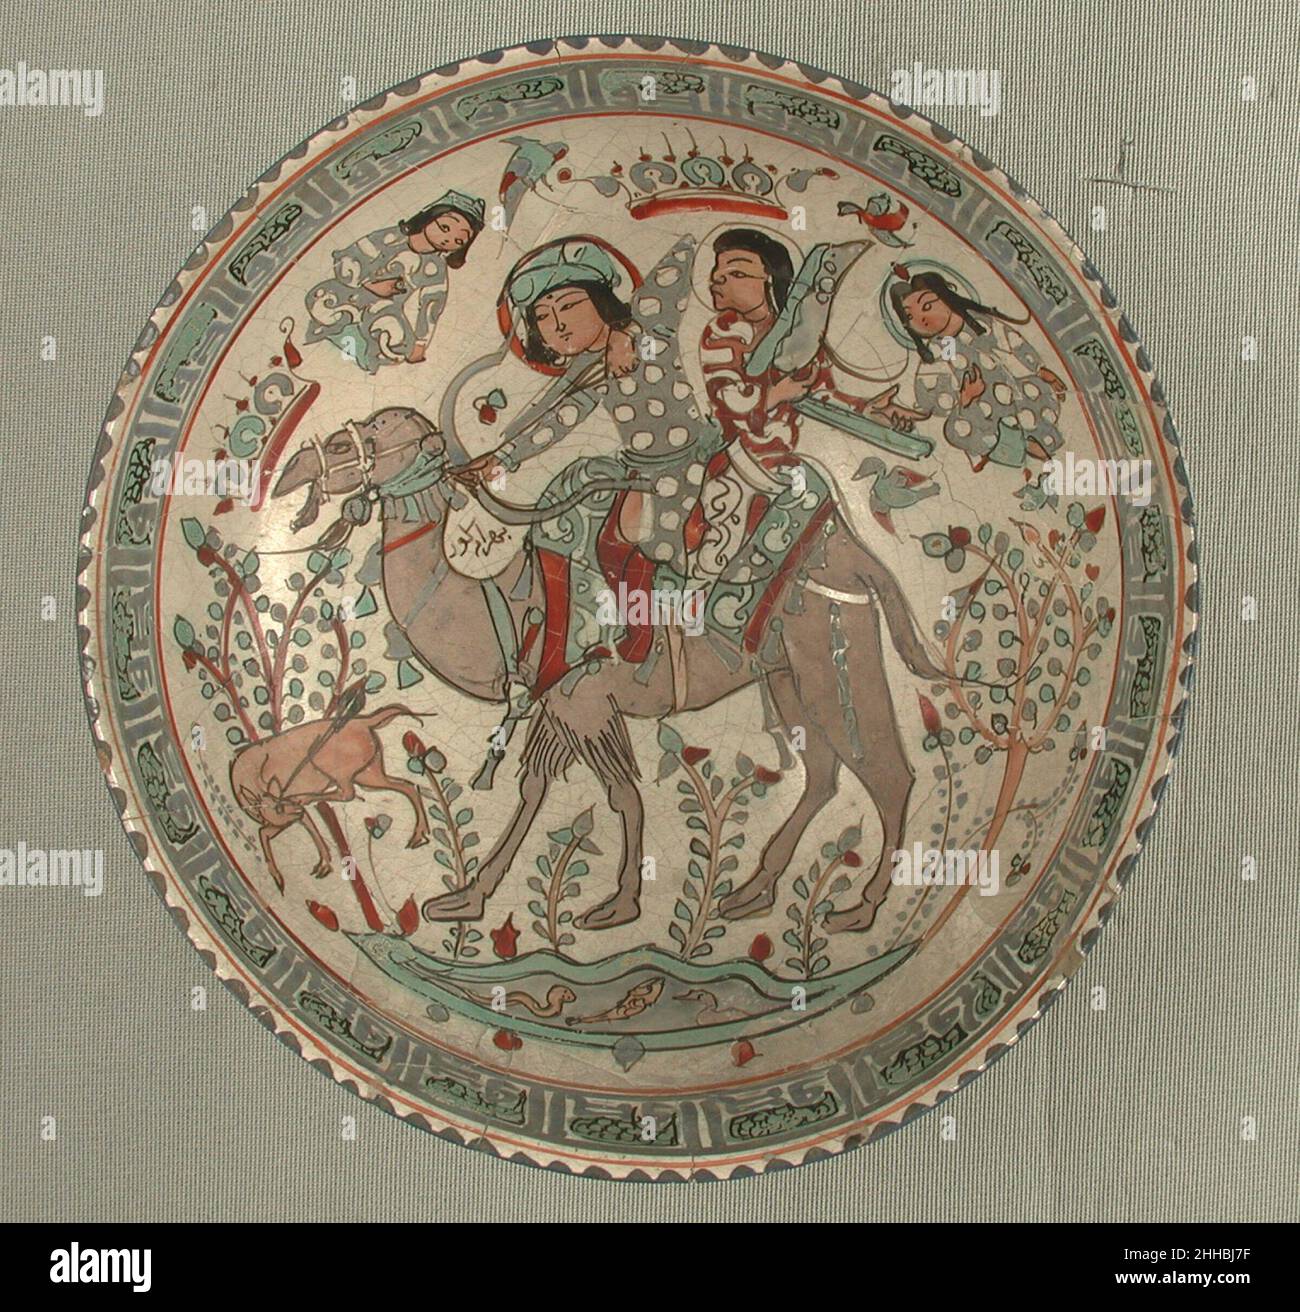 Bowl 12th–13th century The Sasanian hero Bahram Gur, one of the most colorful figures in Persian epic literature, is depicted on this bowl riding a camel with one of his slaves, Azadeh, here shown playing the harp. To put his hunting prowess to the test, Azadeh asked Bahram Gur to pierce the leg and the ear of the gazelle with his arrow in one hit.. Bowl  451389 Stock Photo